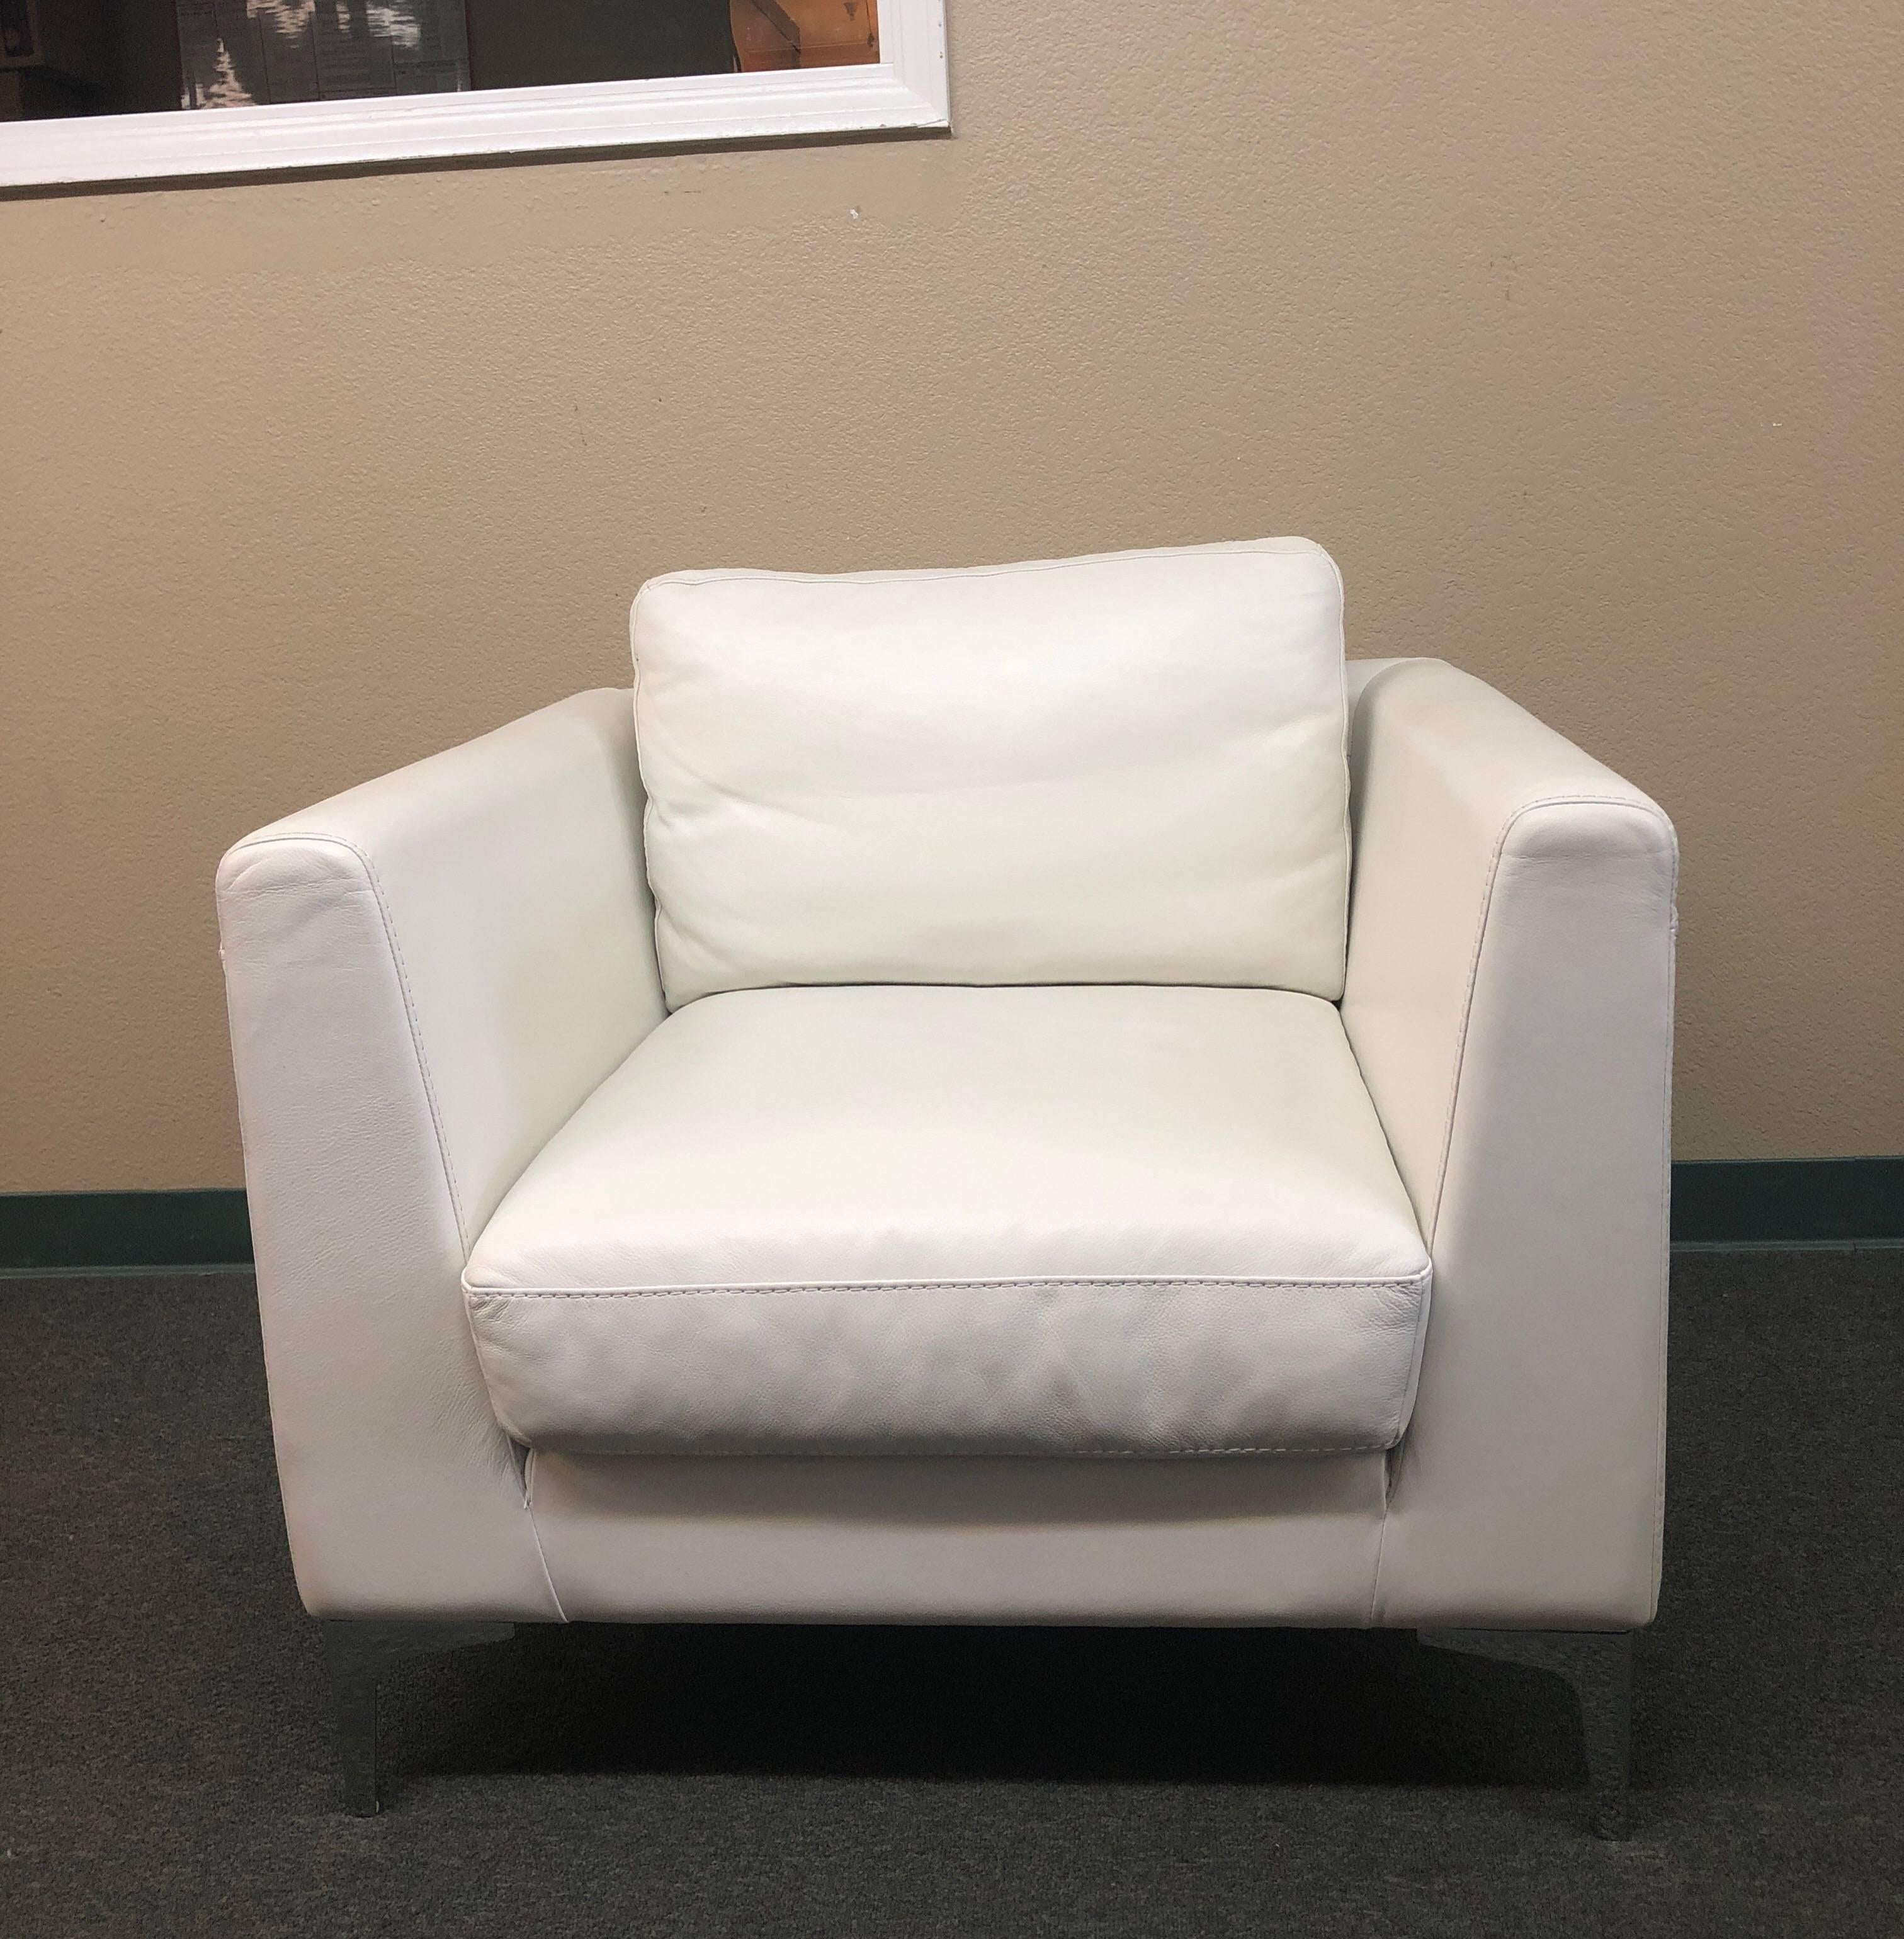 A design within reach Albert armchair in white leather. Manufactured by American leather for design within reach. The chair sits on chromed metal legs. They are finished with top stitching detail. Measures: Arms height: 26.5 inches, seat height: 17